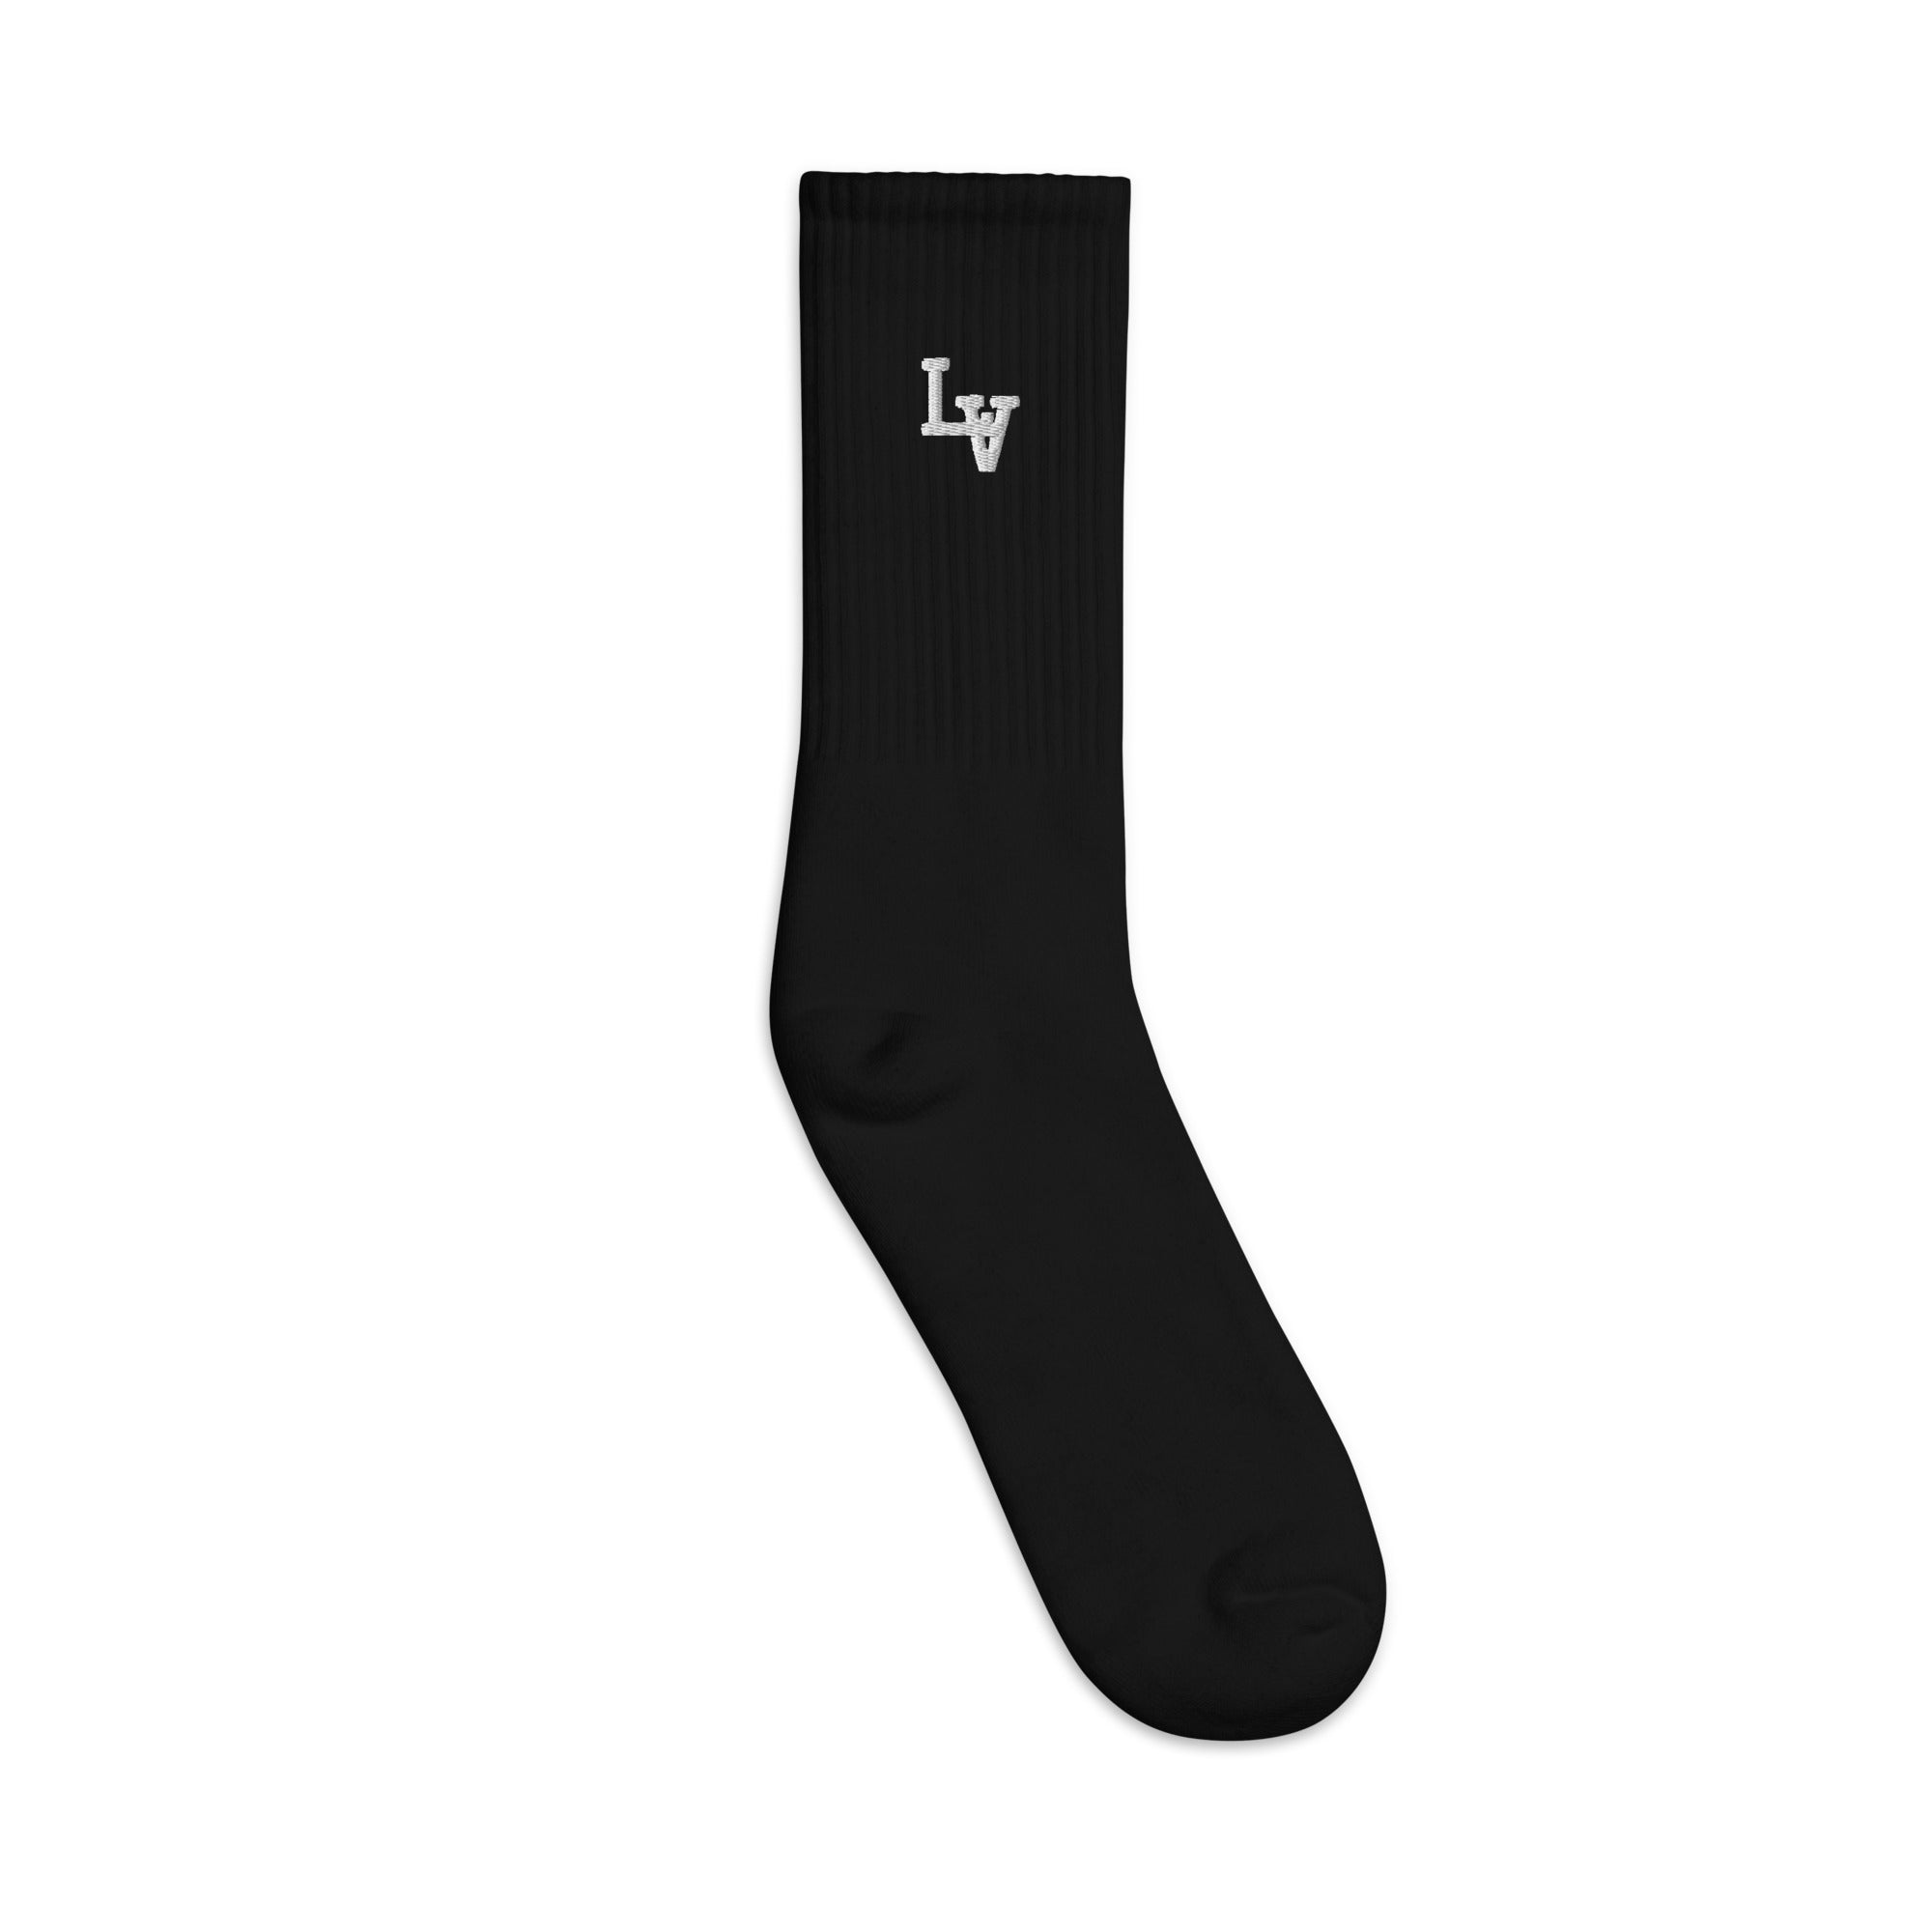 LV Archives Set Of 6 Socks S00 - OBSOLETES DO NOT TOUCH MP3405